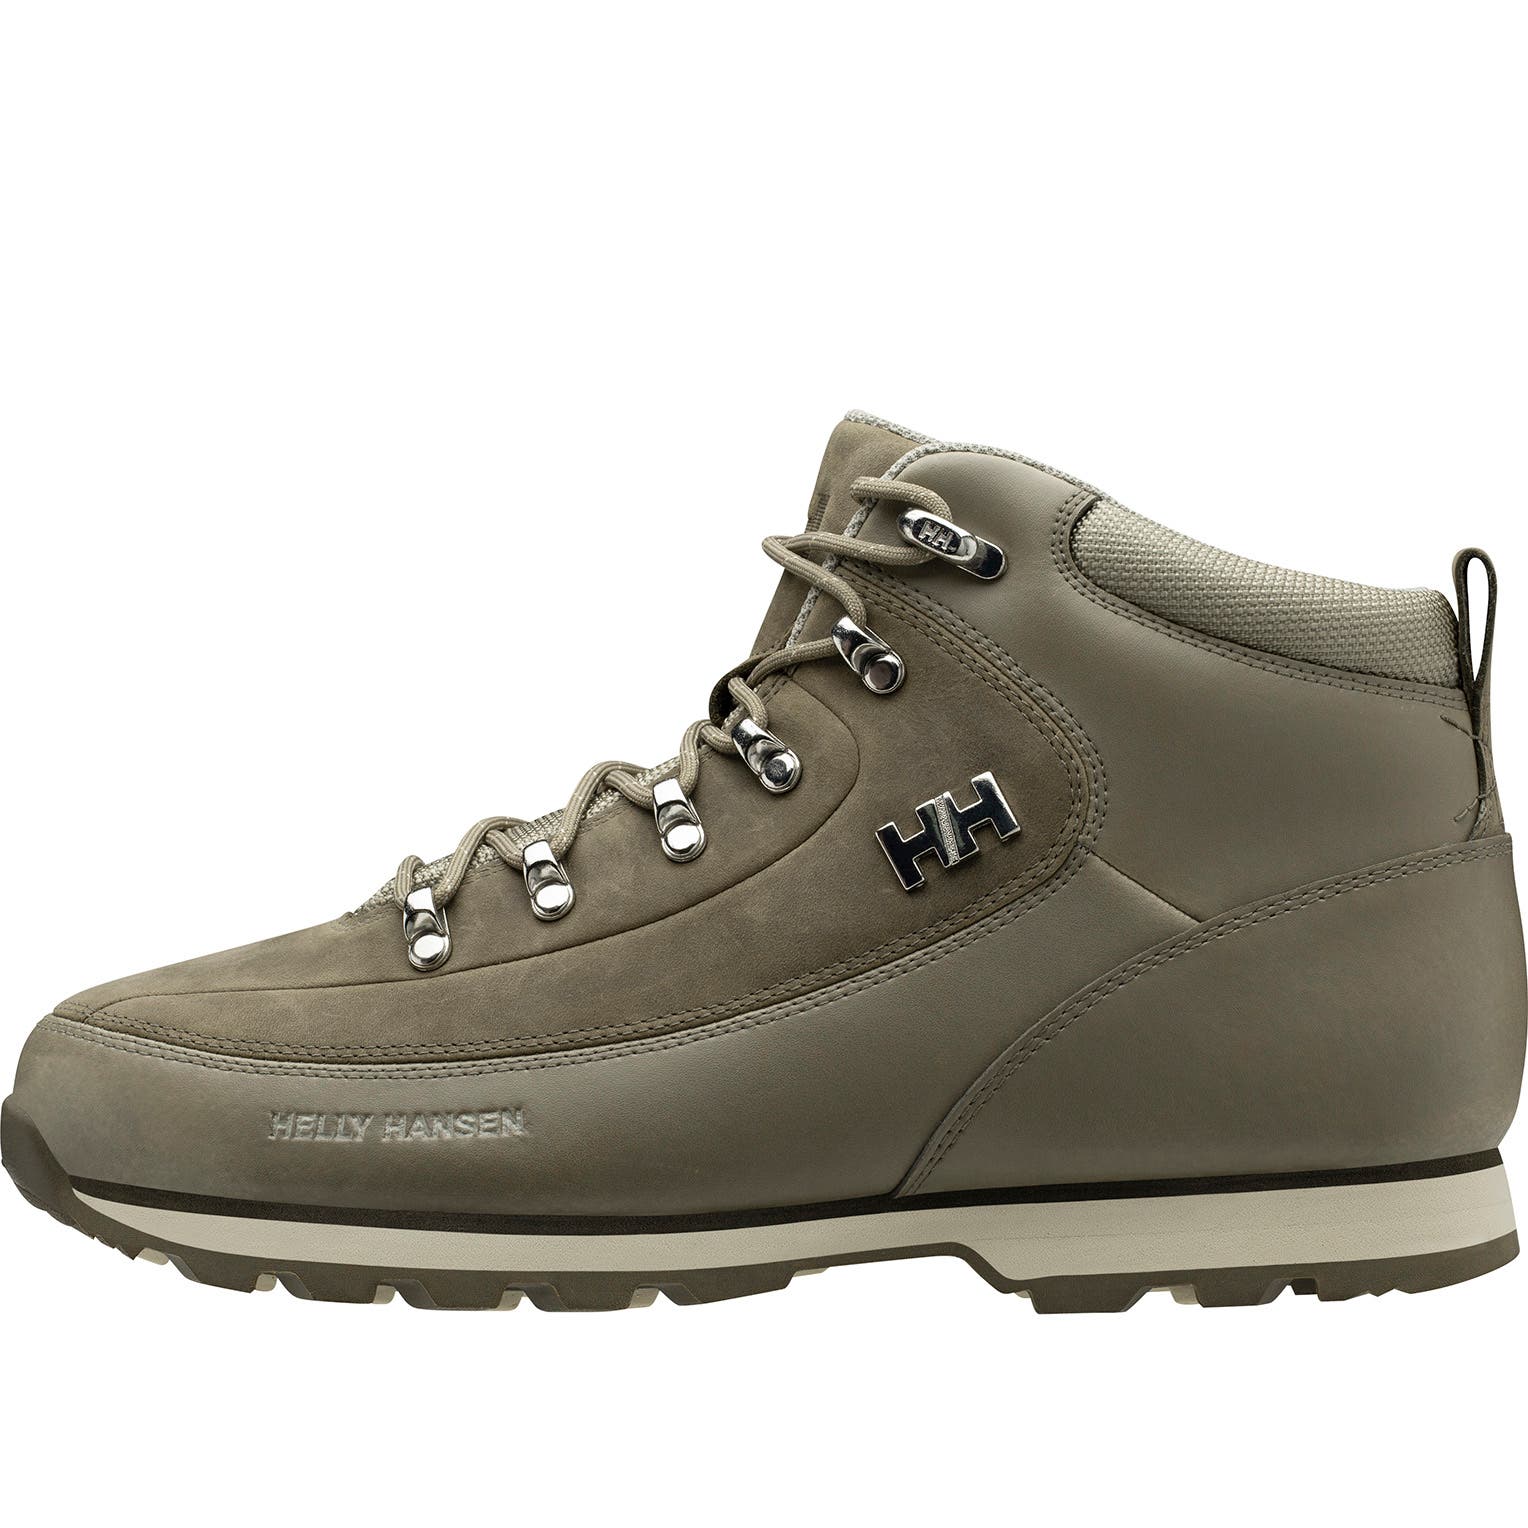 Helly Hansen Men's The Forester Winter Boot in Fallen Rock-Aluminum from the side